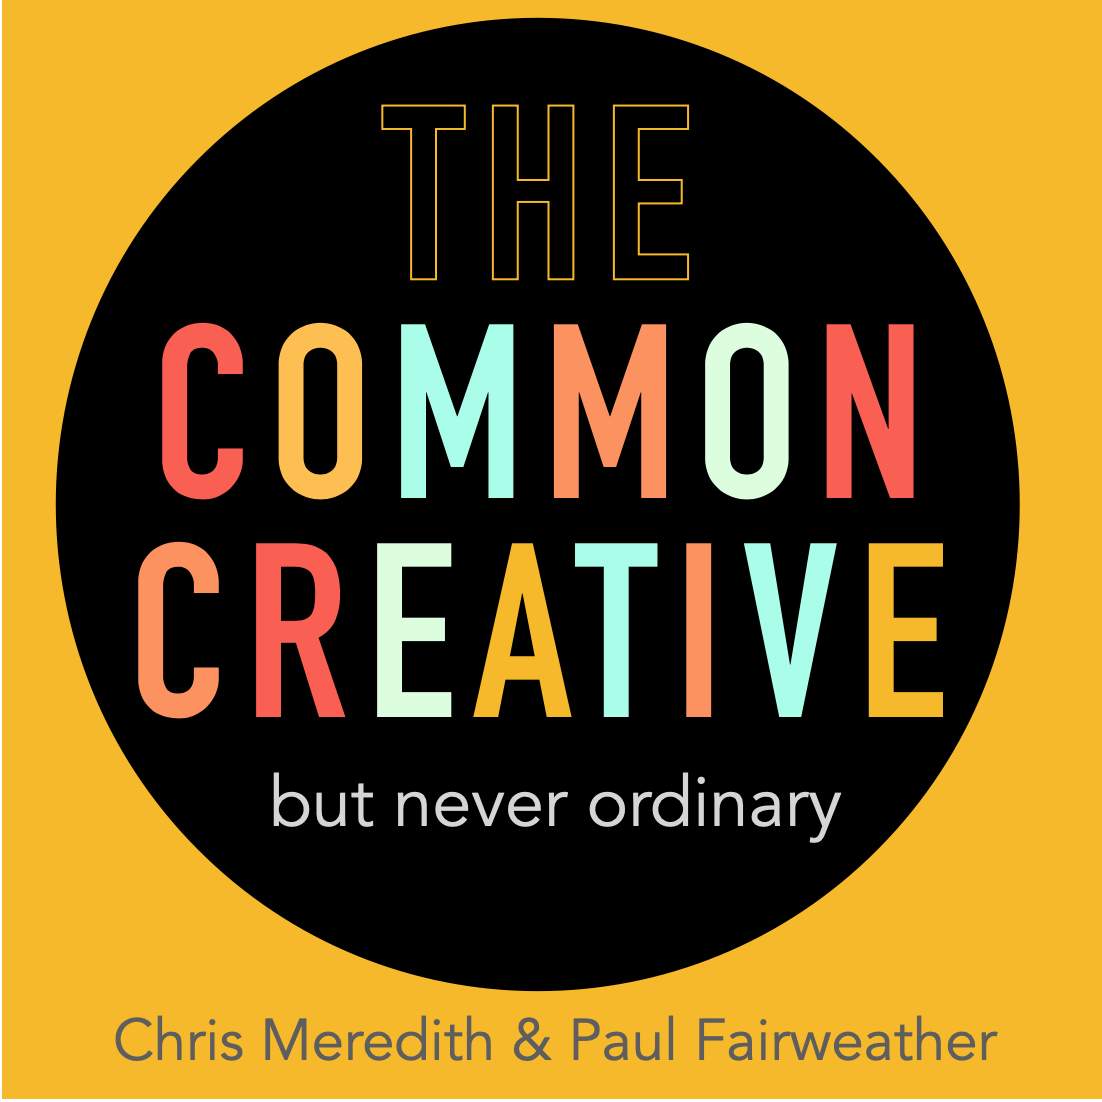 Episode 7 - Michael Fairweather: Armed with Creativity